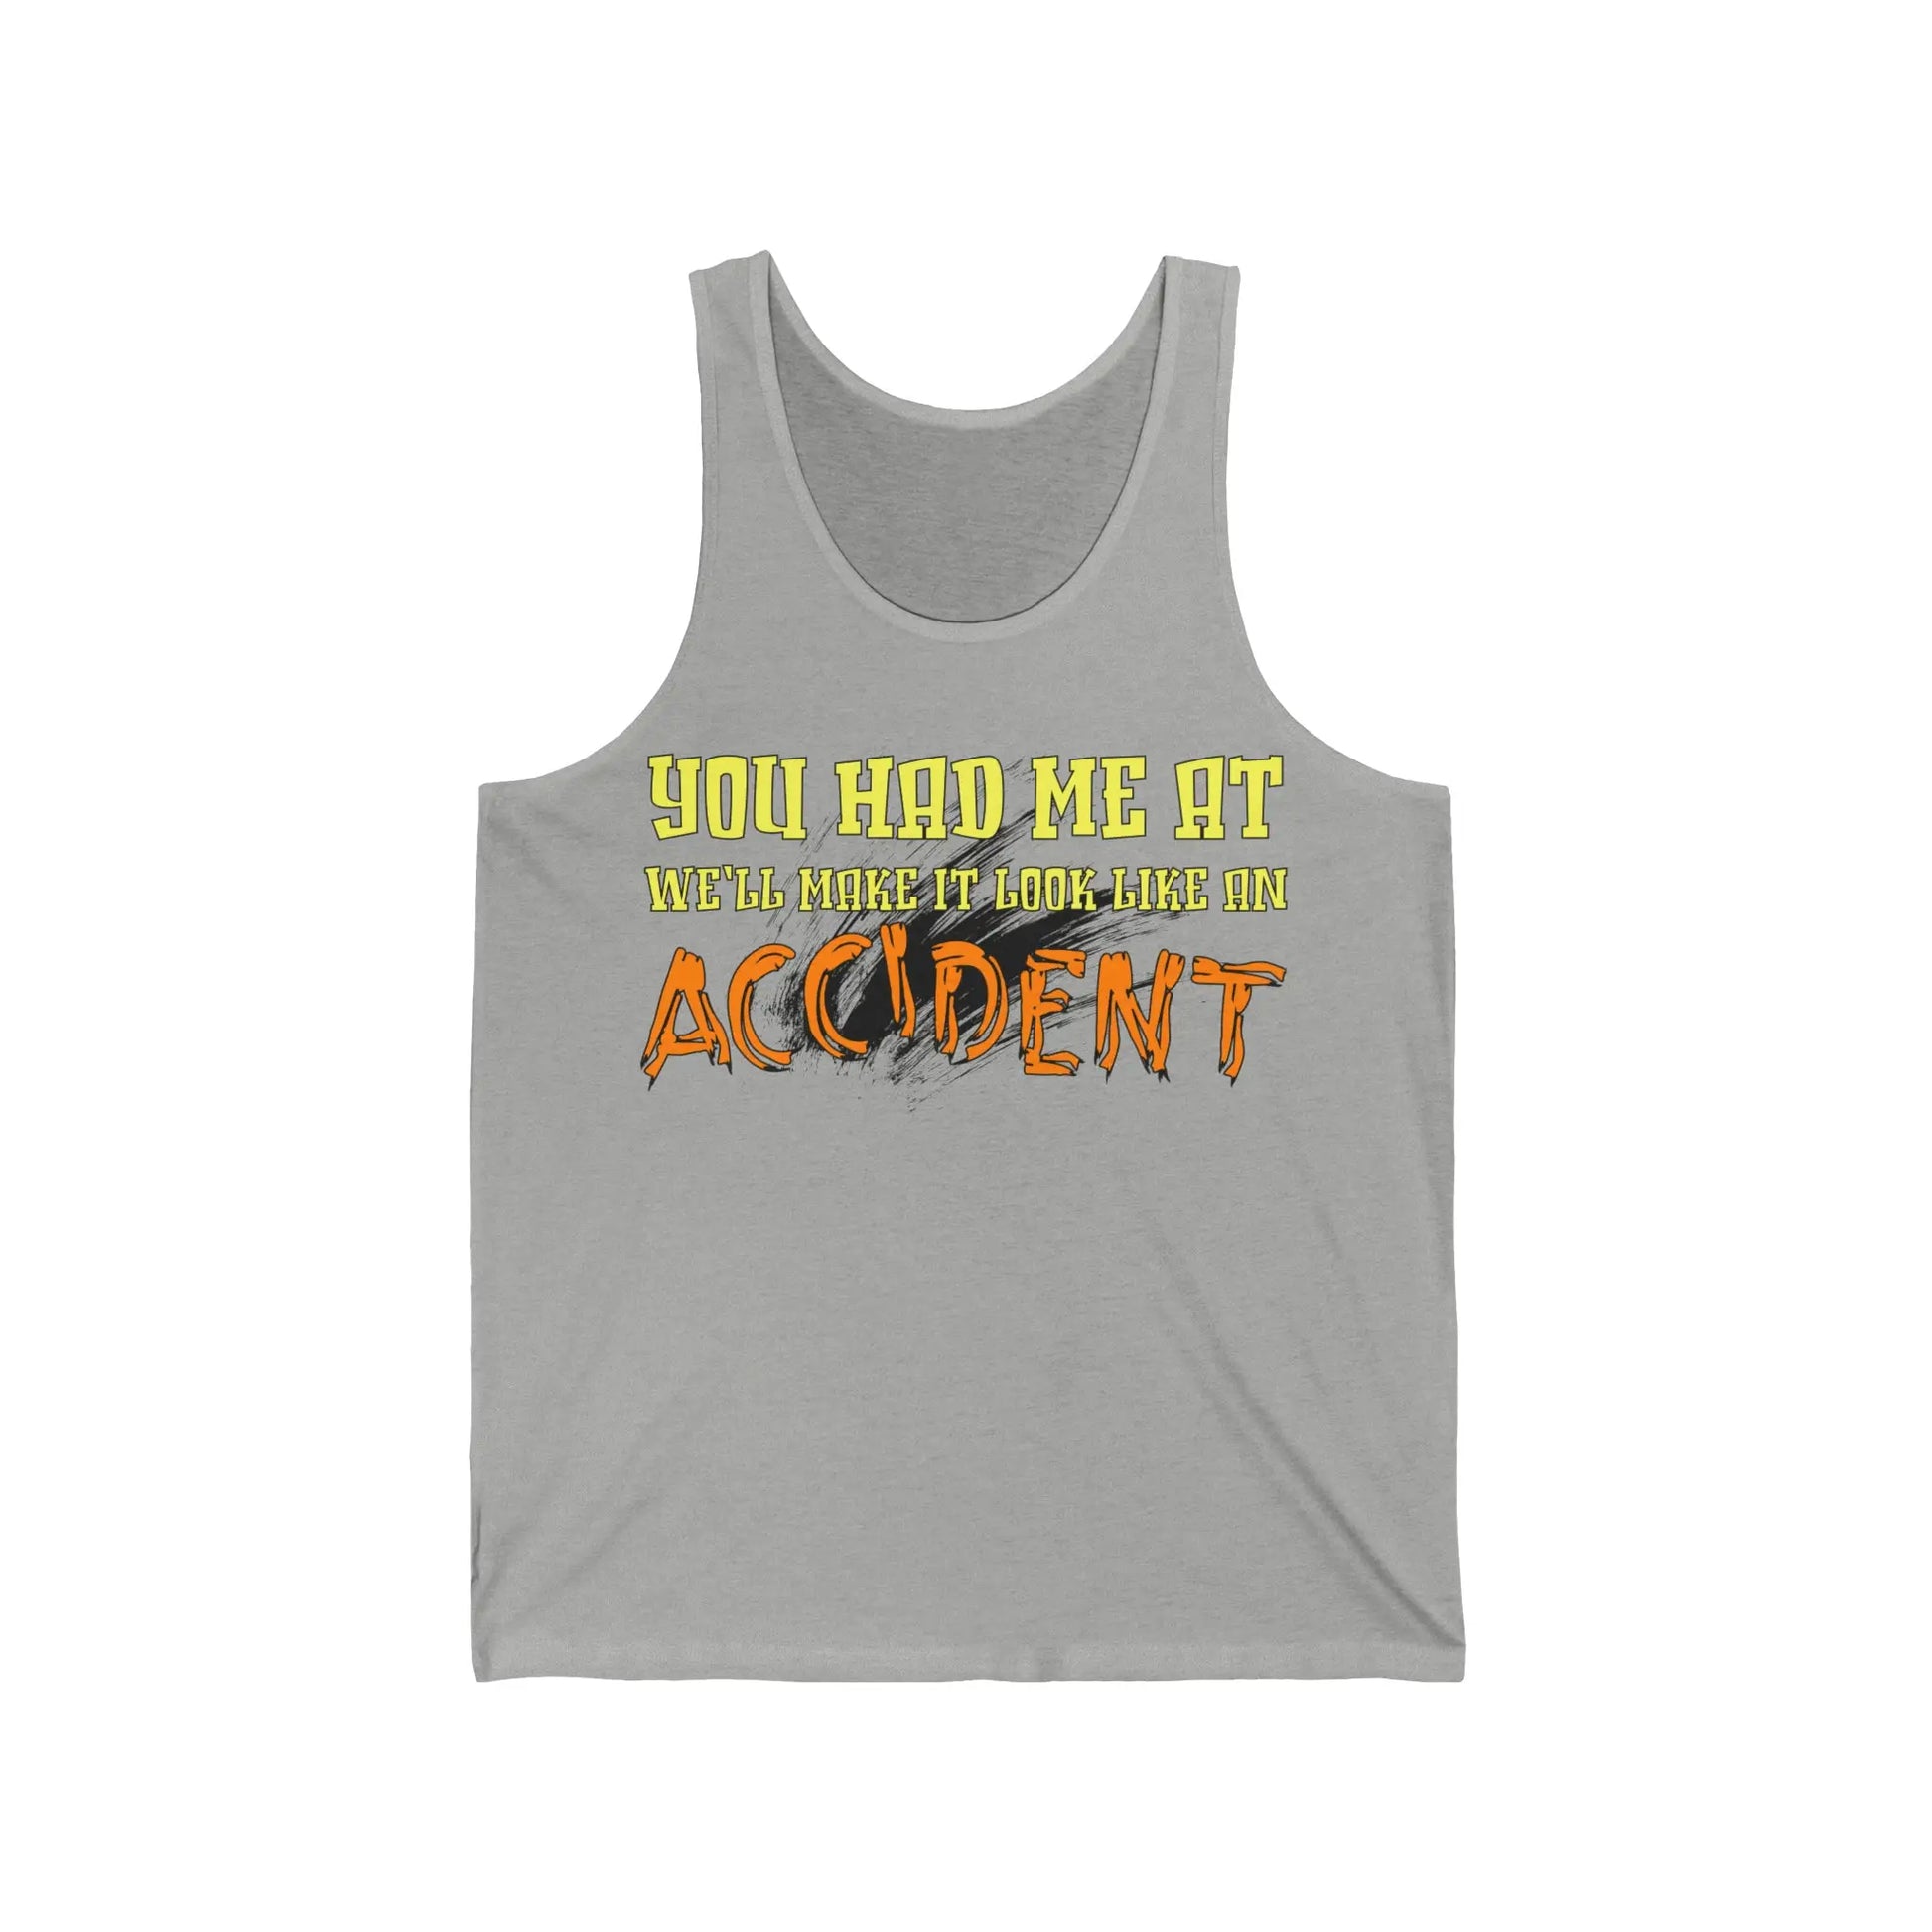 Make It Look Like An Accident Men's Tank - Wicked Tees